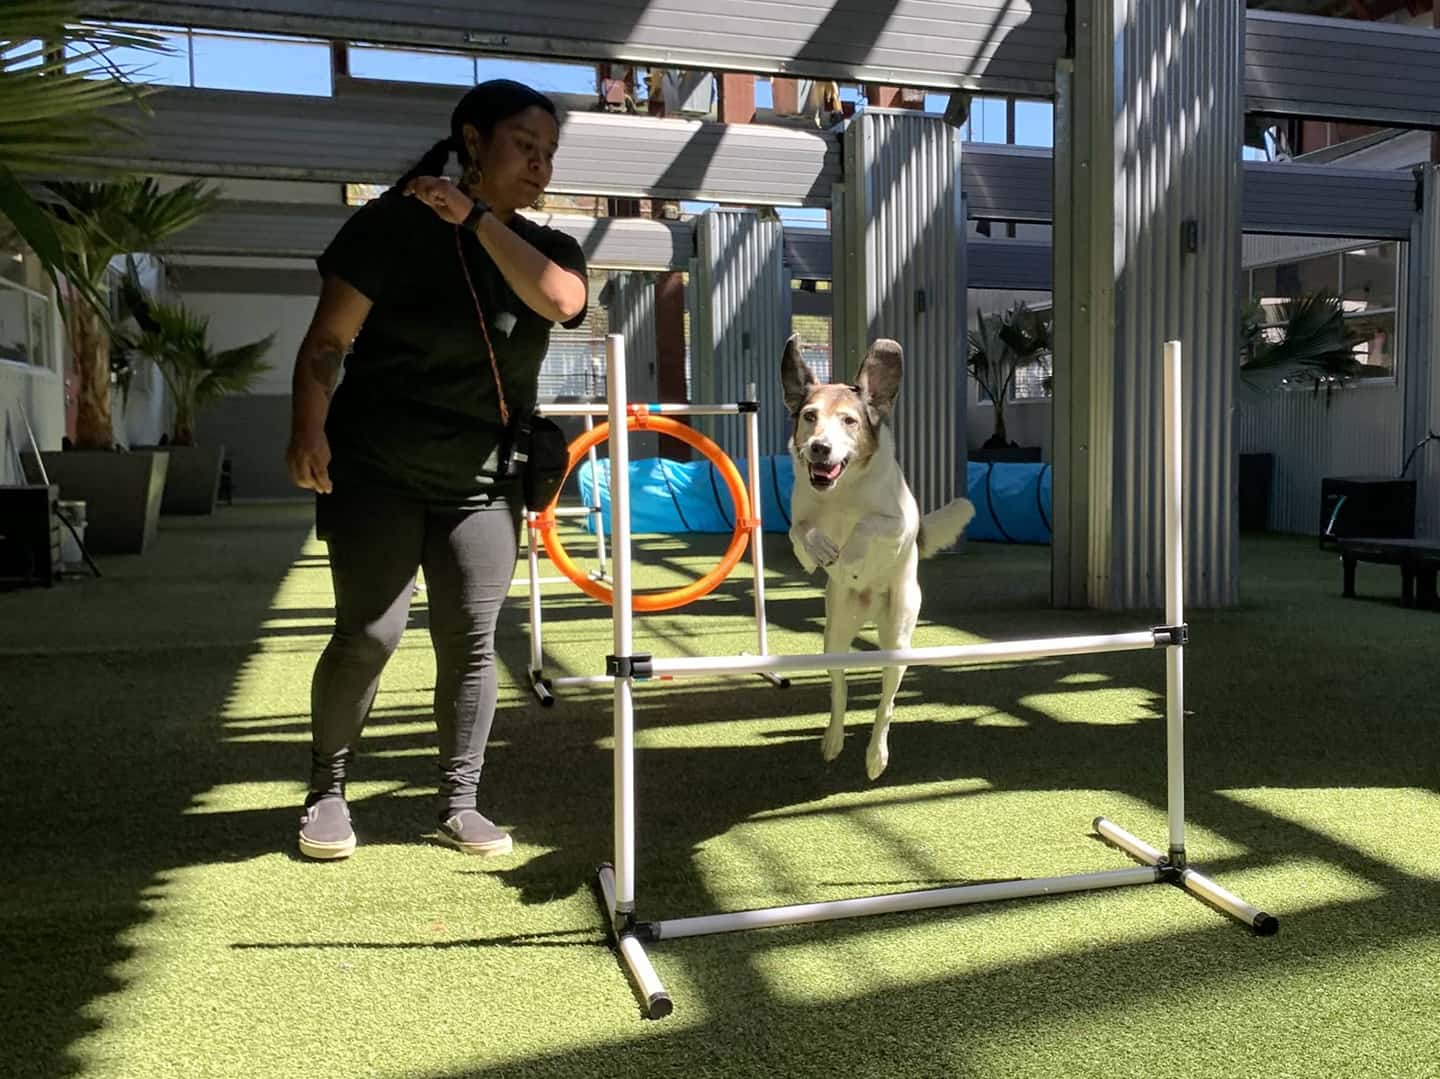 Canine Enrichment Solves Doggie Daycare Not For All Dogs - Pet Camp